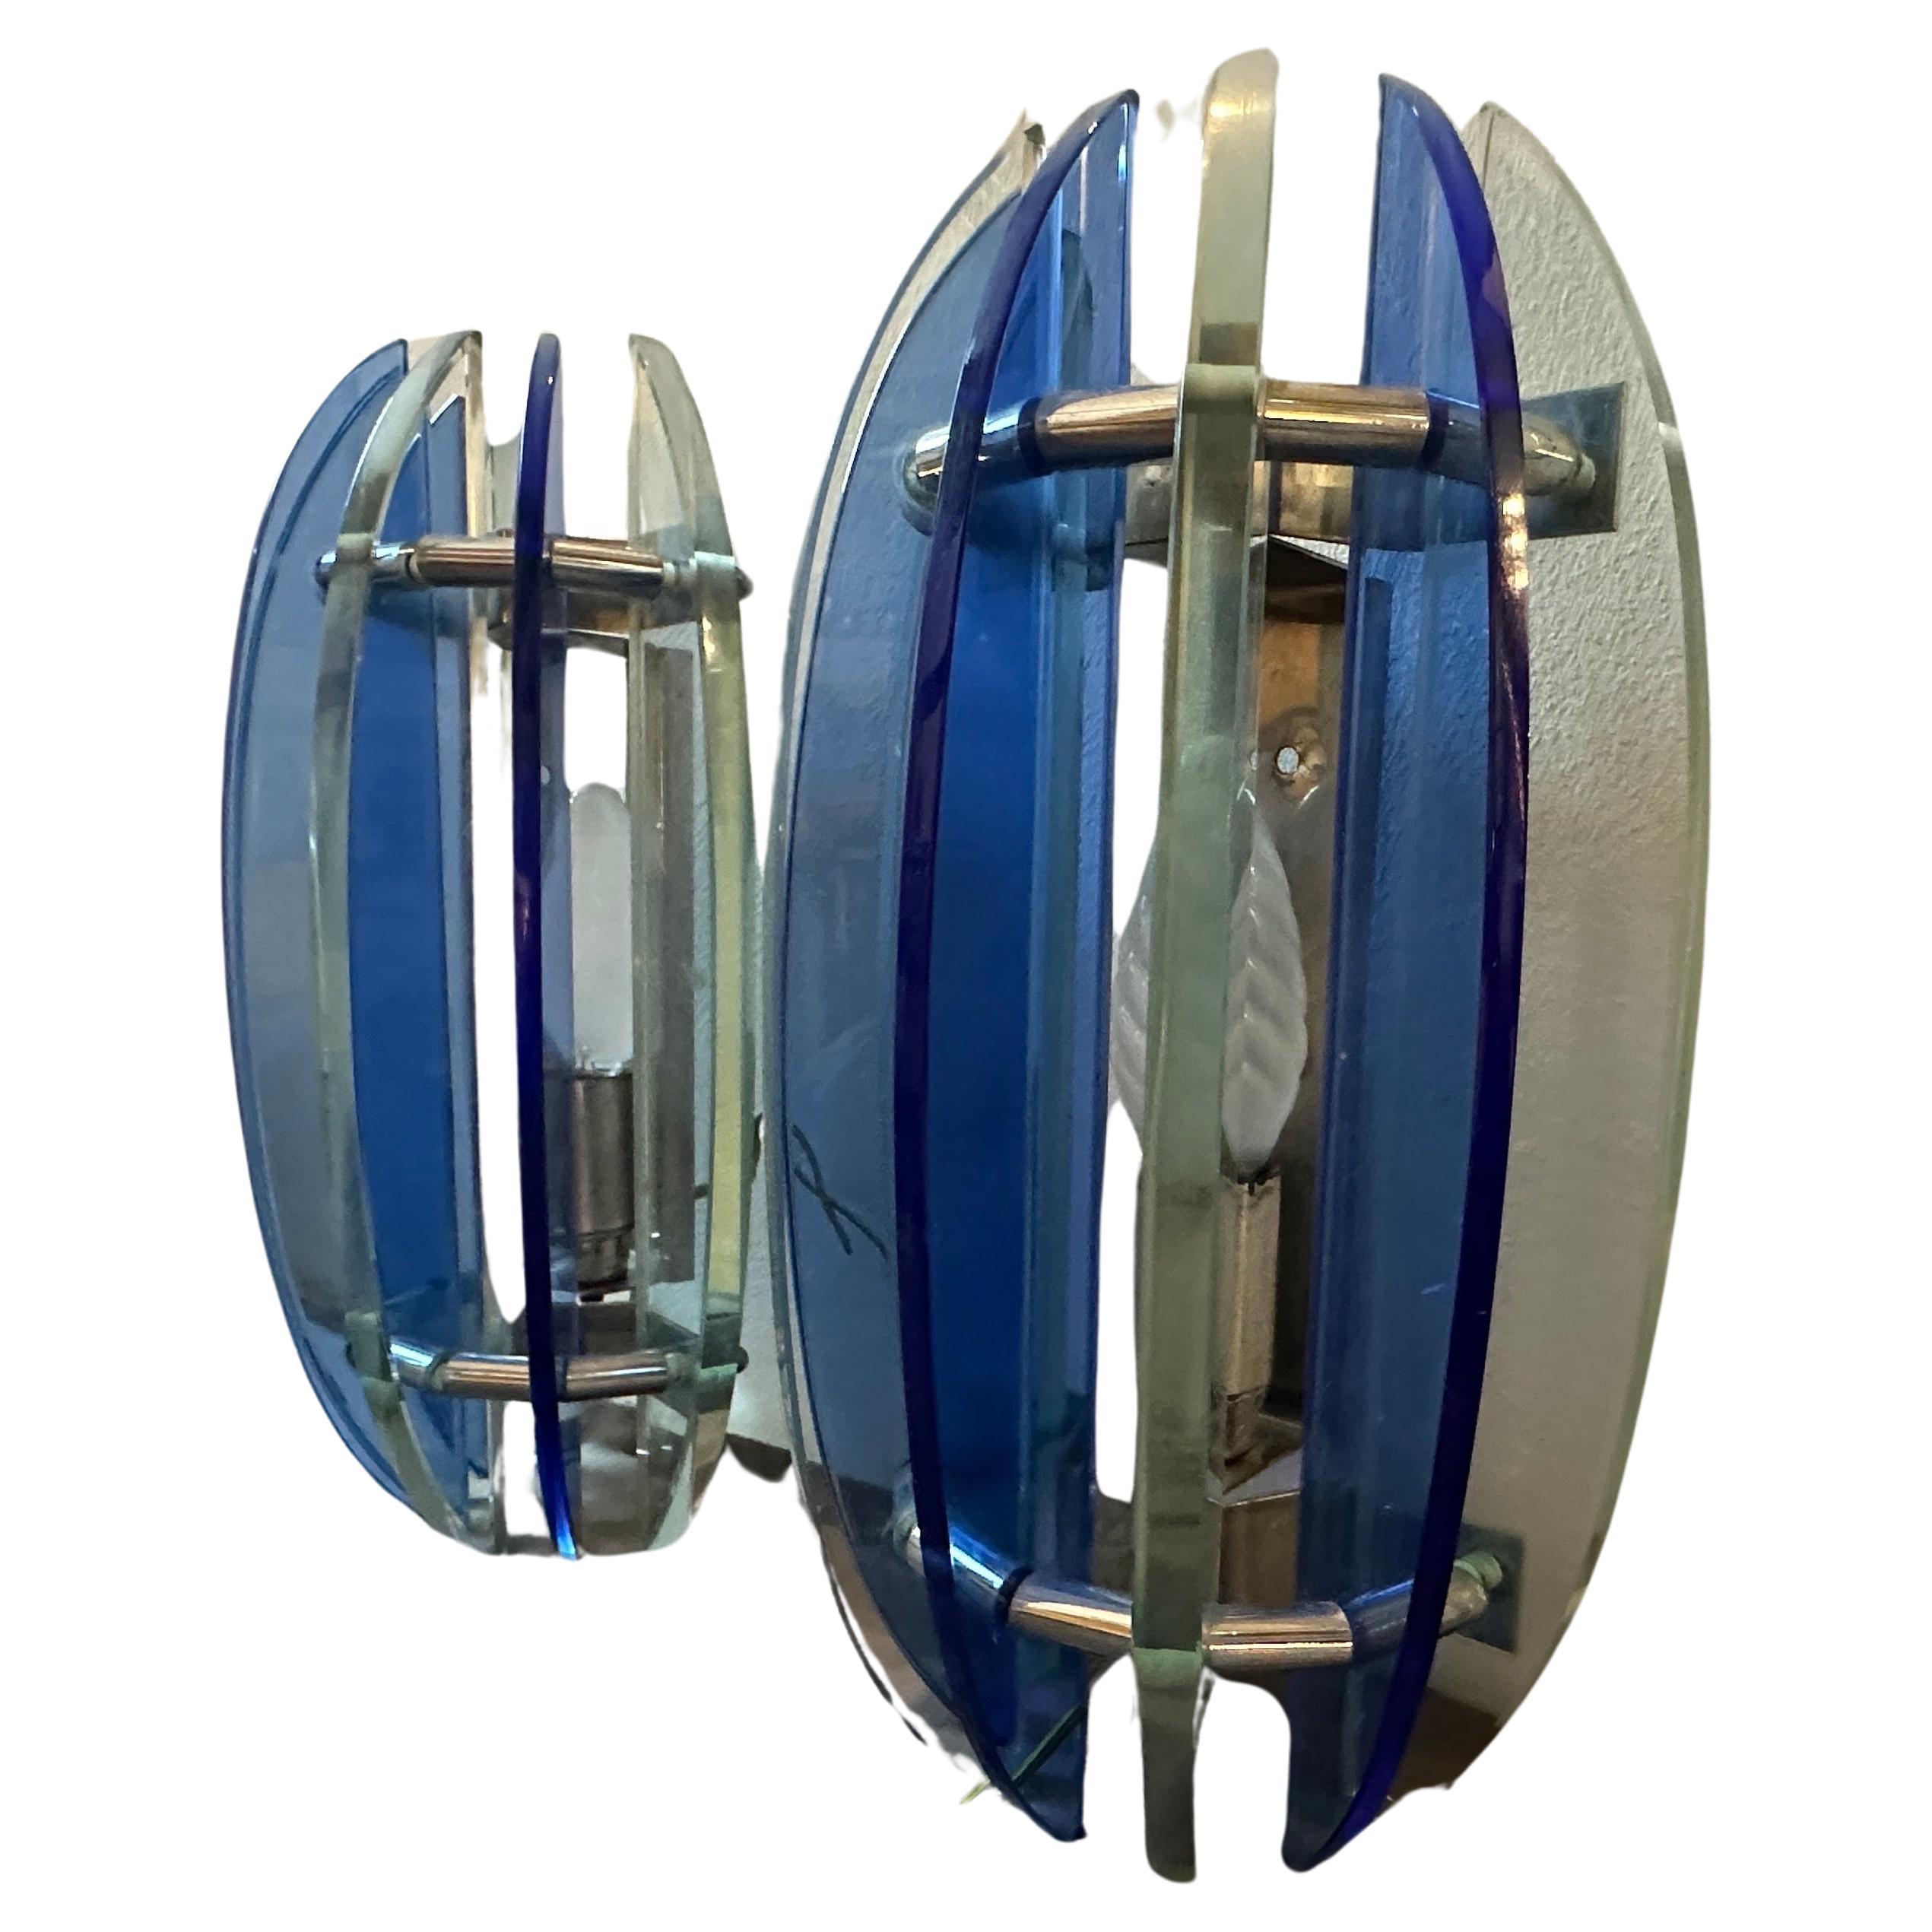 A pair of iconic wall sconces designed and manufactured in Italy by Veca in the Space Age Era, they are in perfect condition and in working order.This set of Wall Sconces by Veca it's a striking representation of mid-century modern design. They are